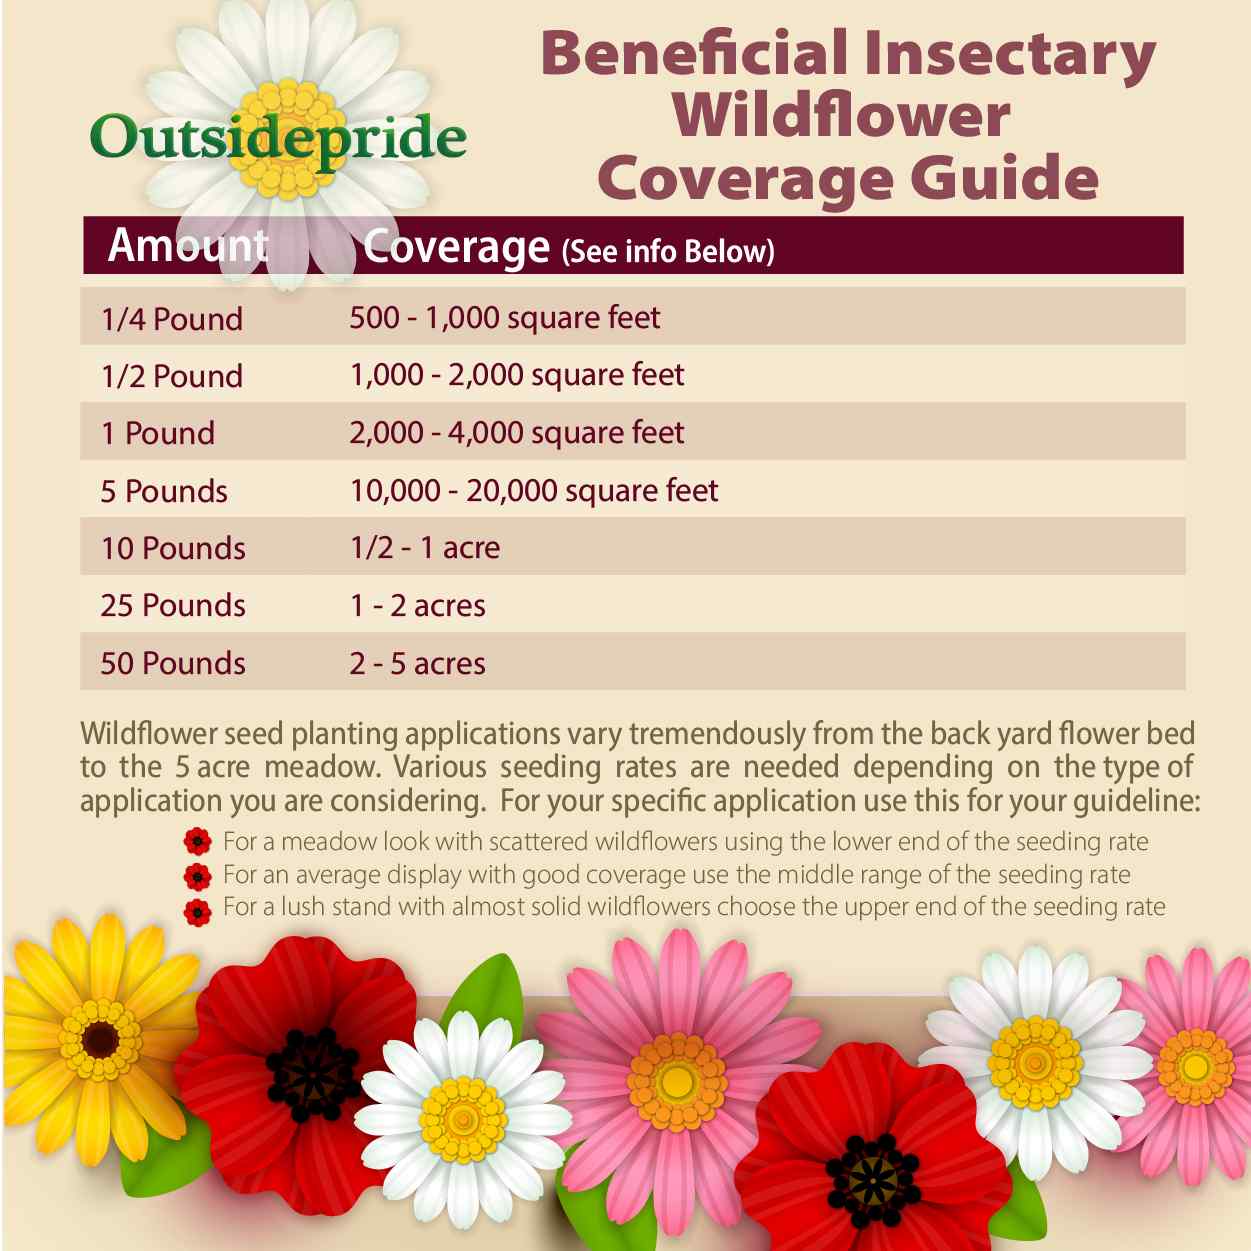 Beneficial Insectary Wildflower Seeding Rates